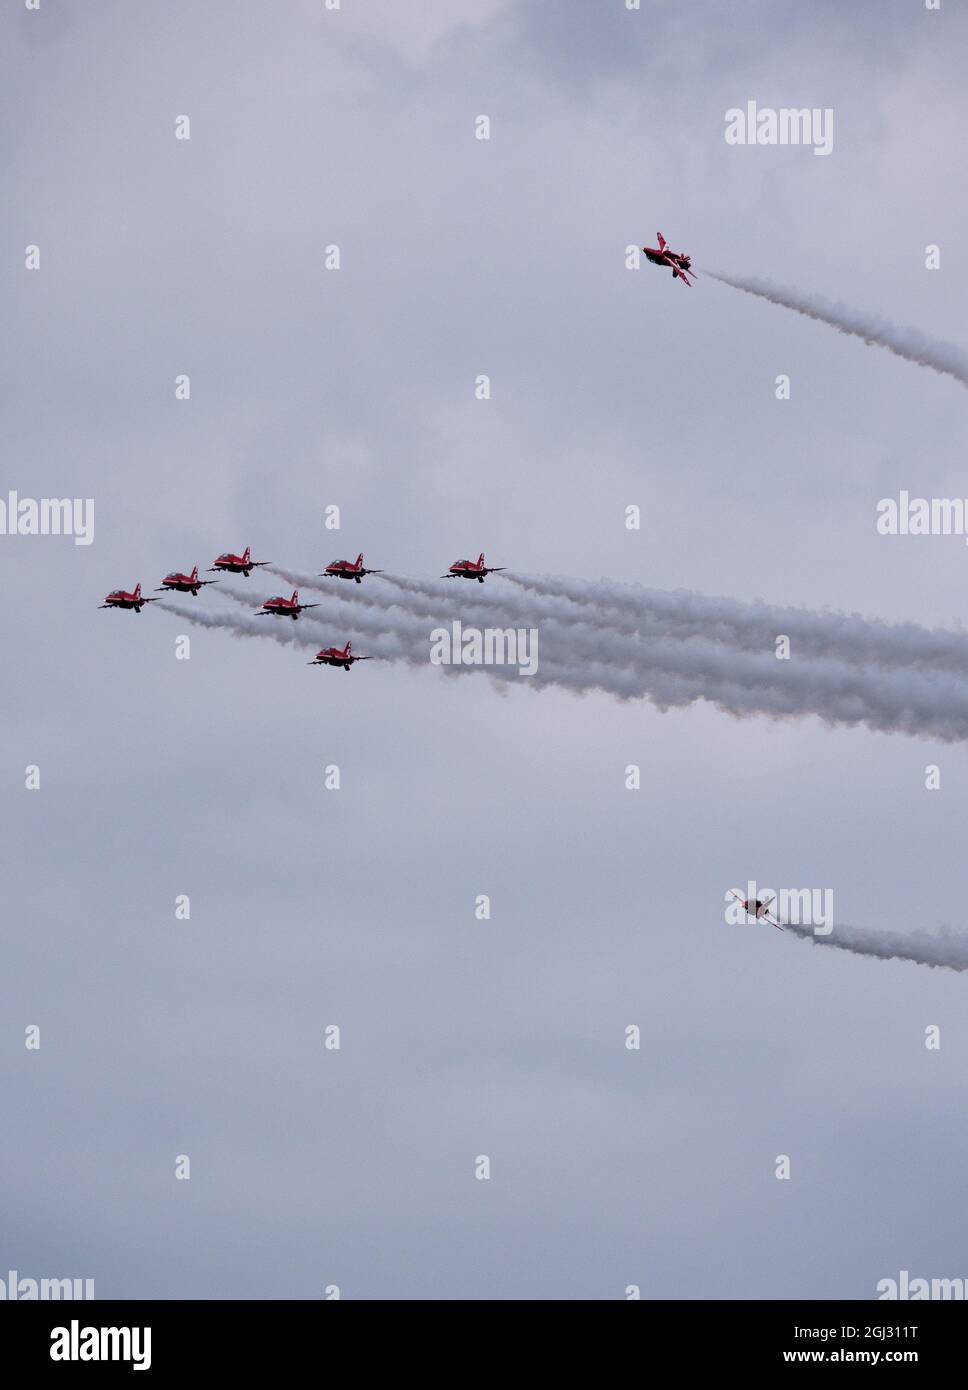 Red Arrows aerial display team in tight formation with one jet above the  main group Stock Photo